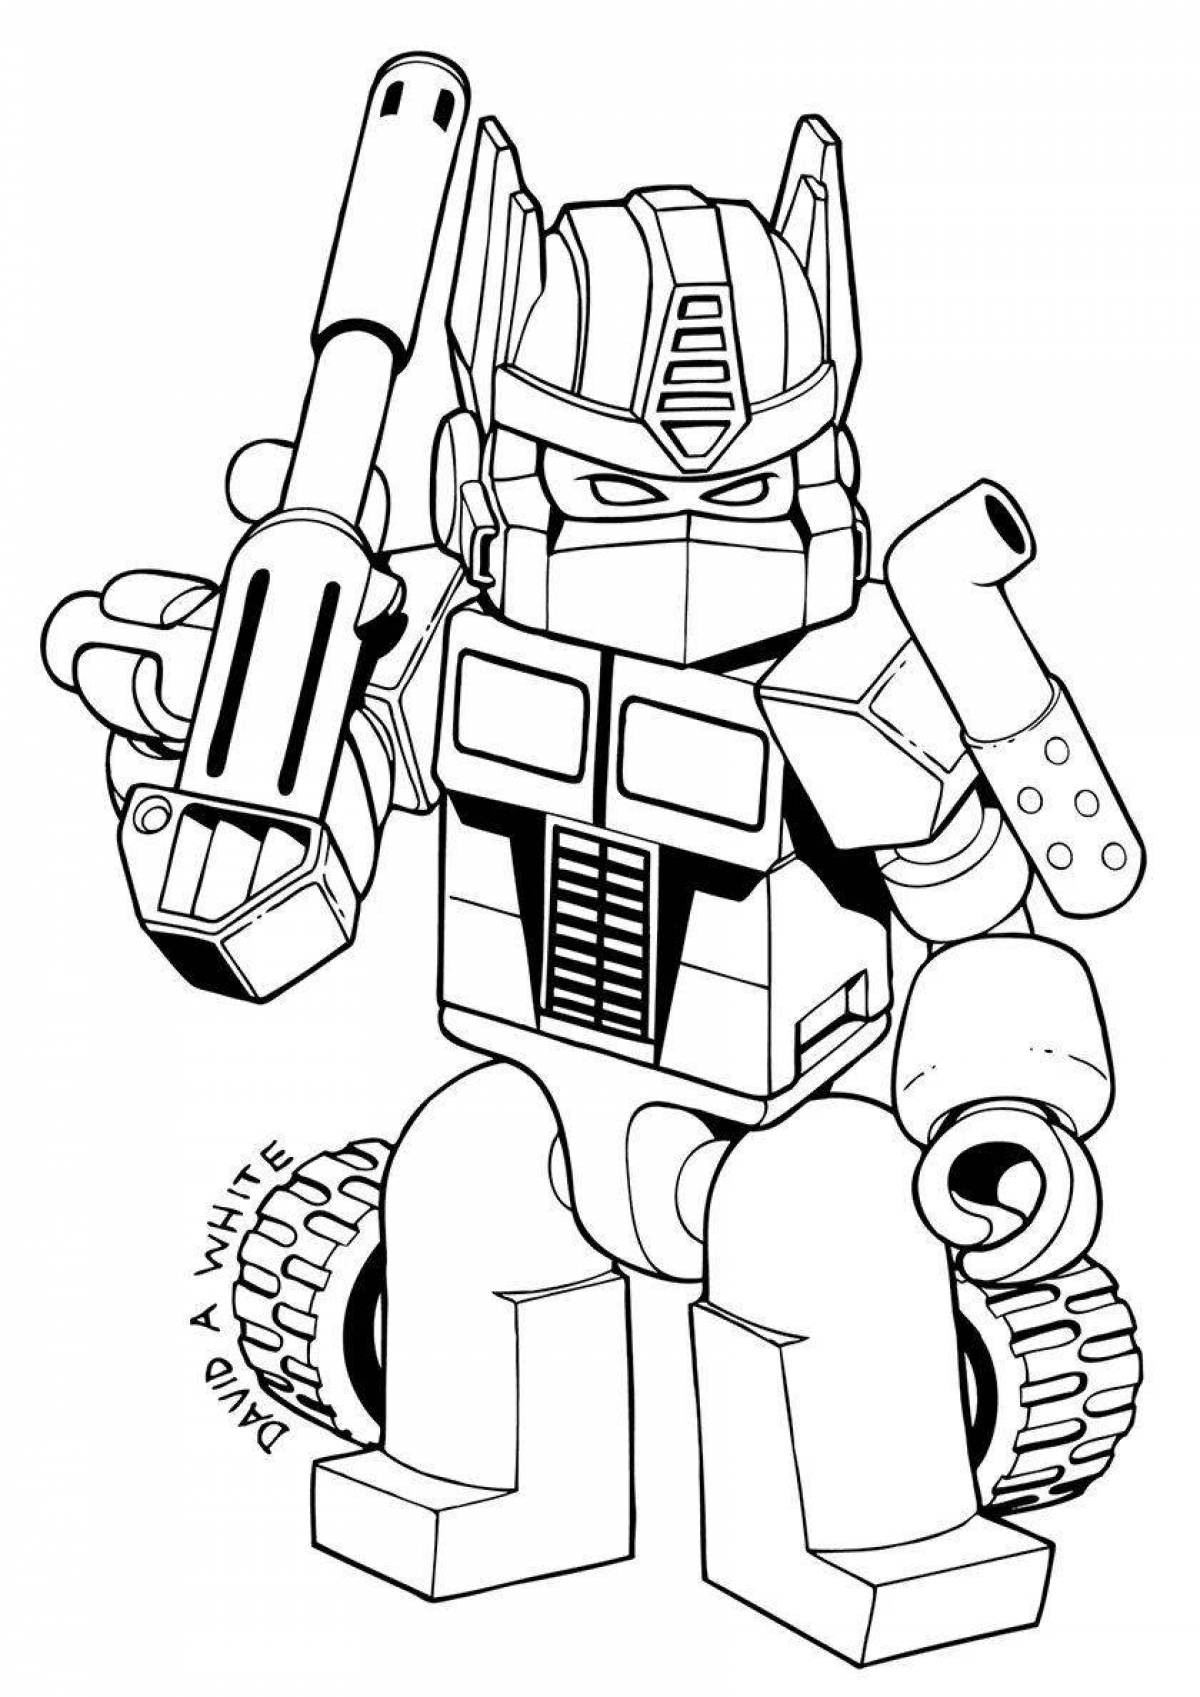 Transformers playful coloring page for 6-7 year olds